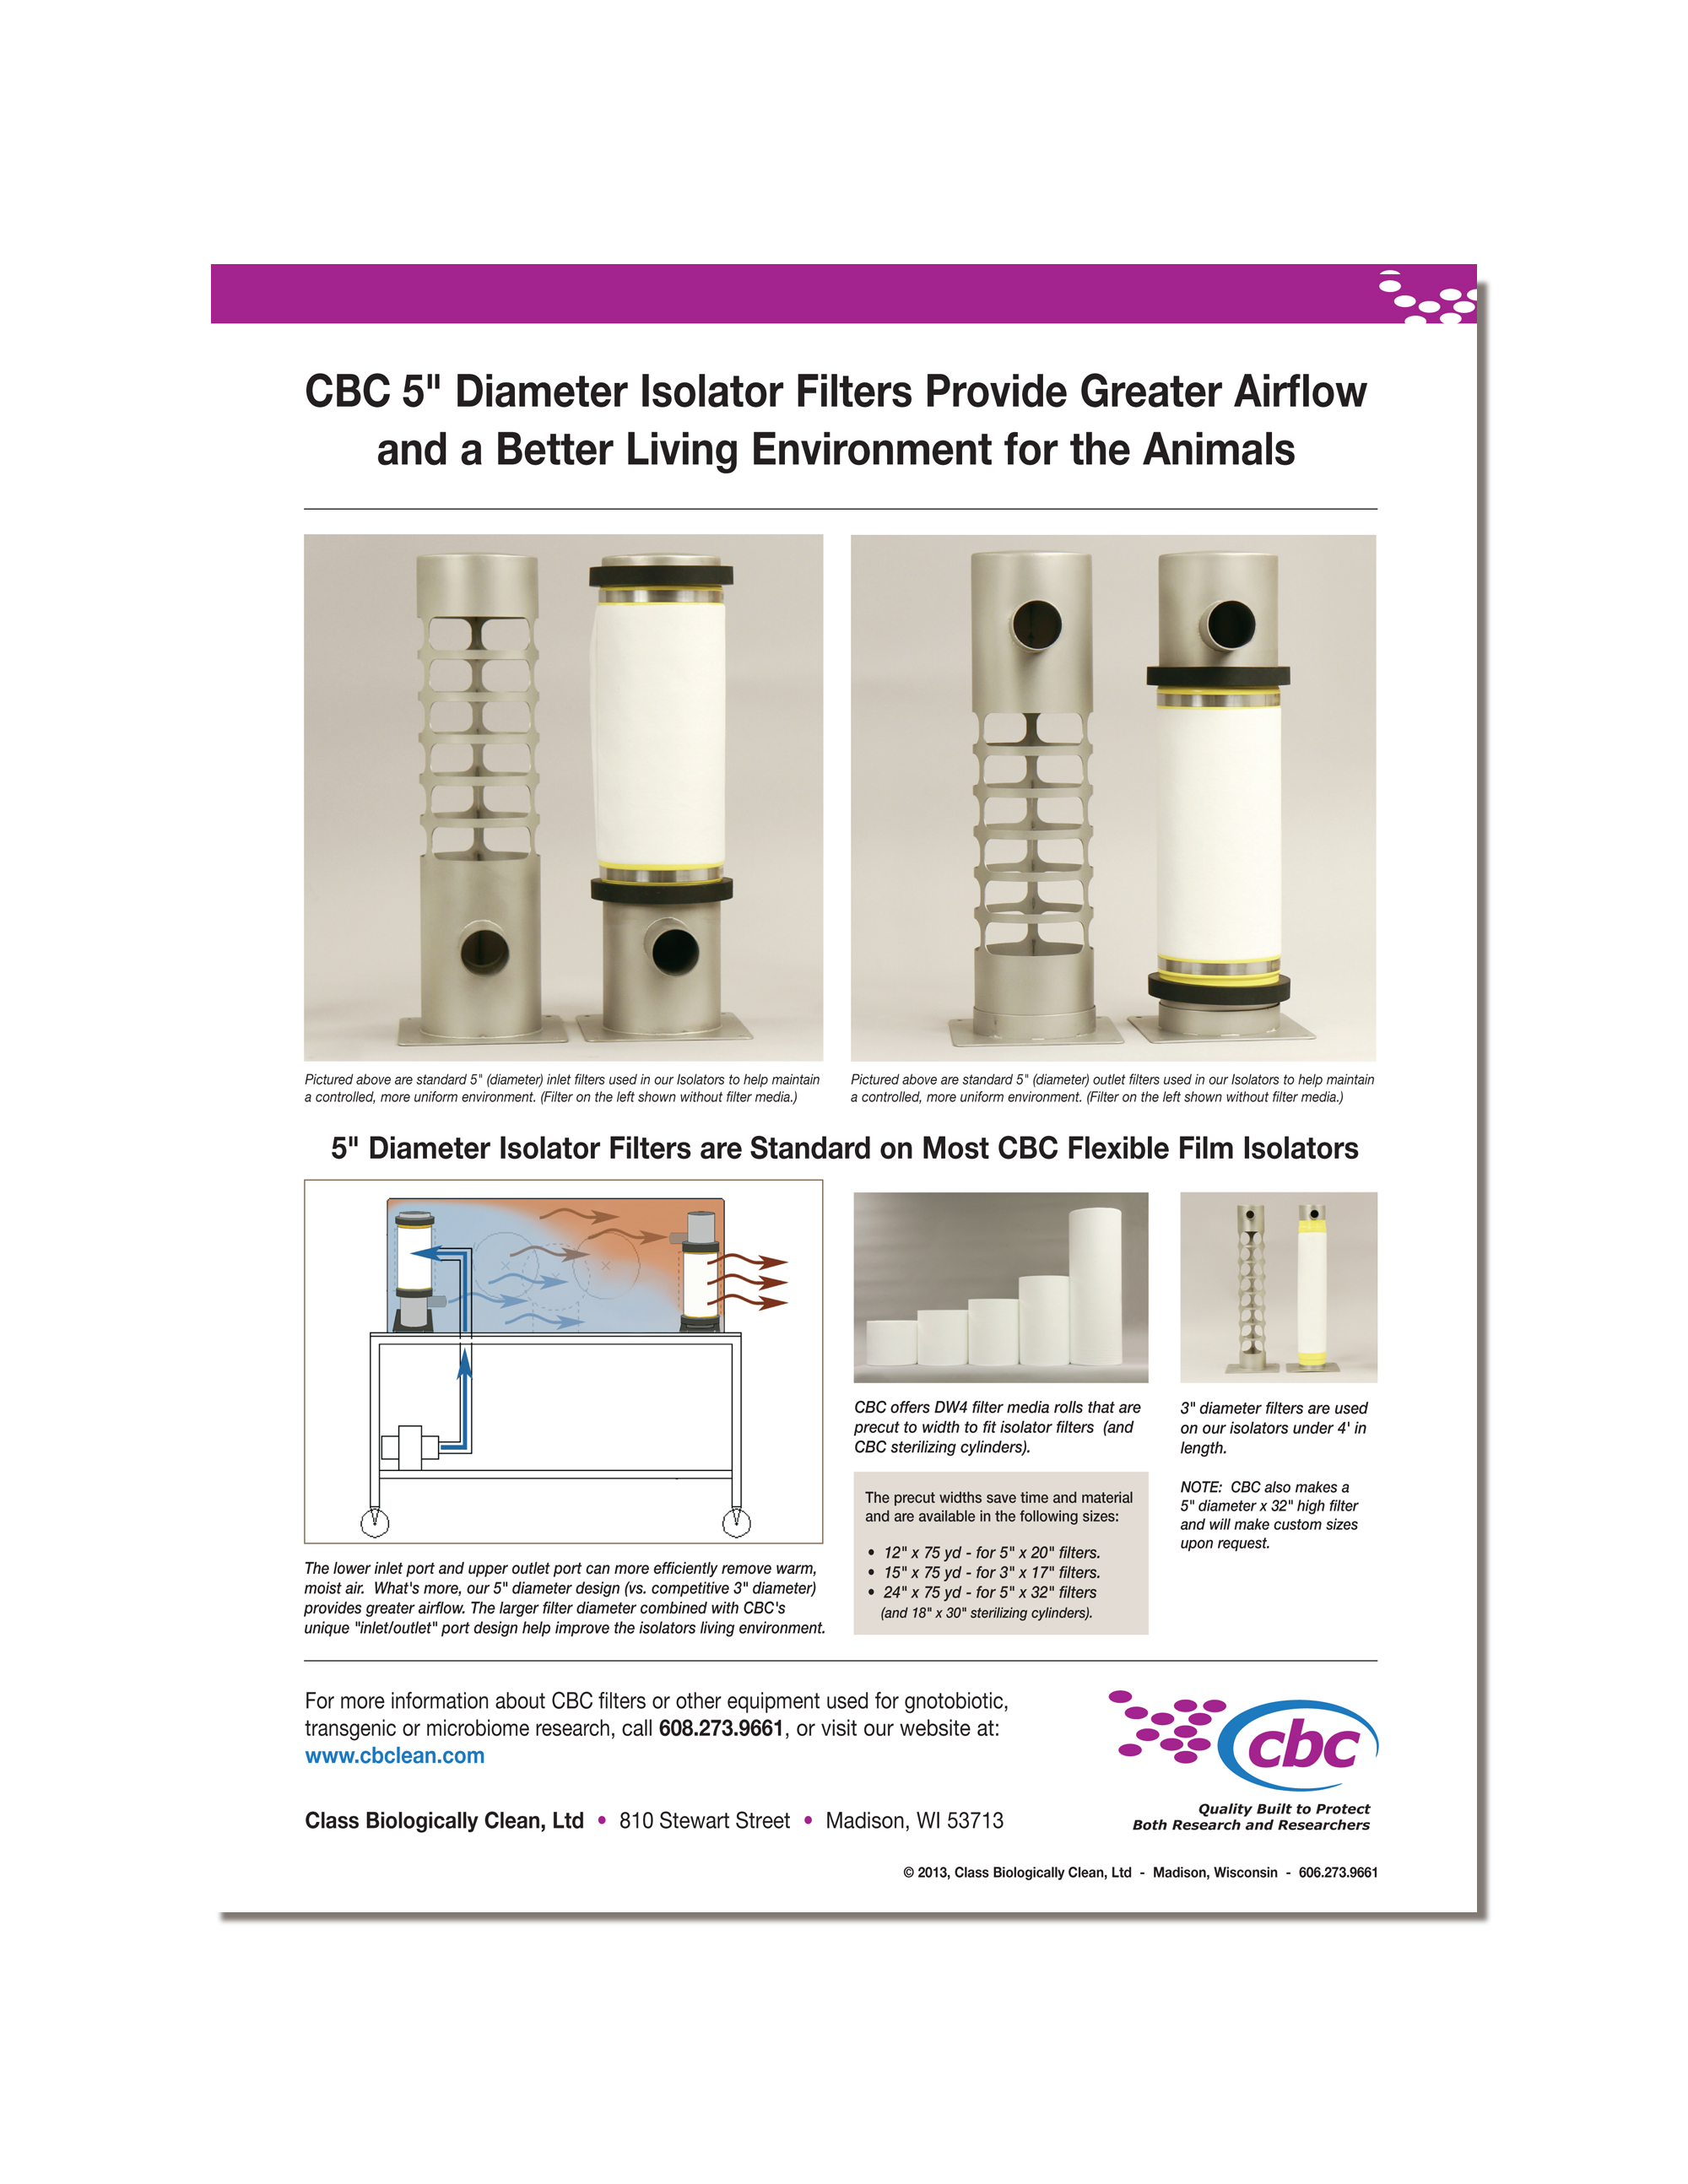 Download a printable flyer about CBC's Sterilizing Cylinders. Click here to download flyer.